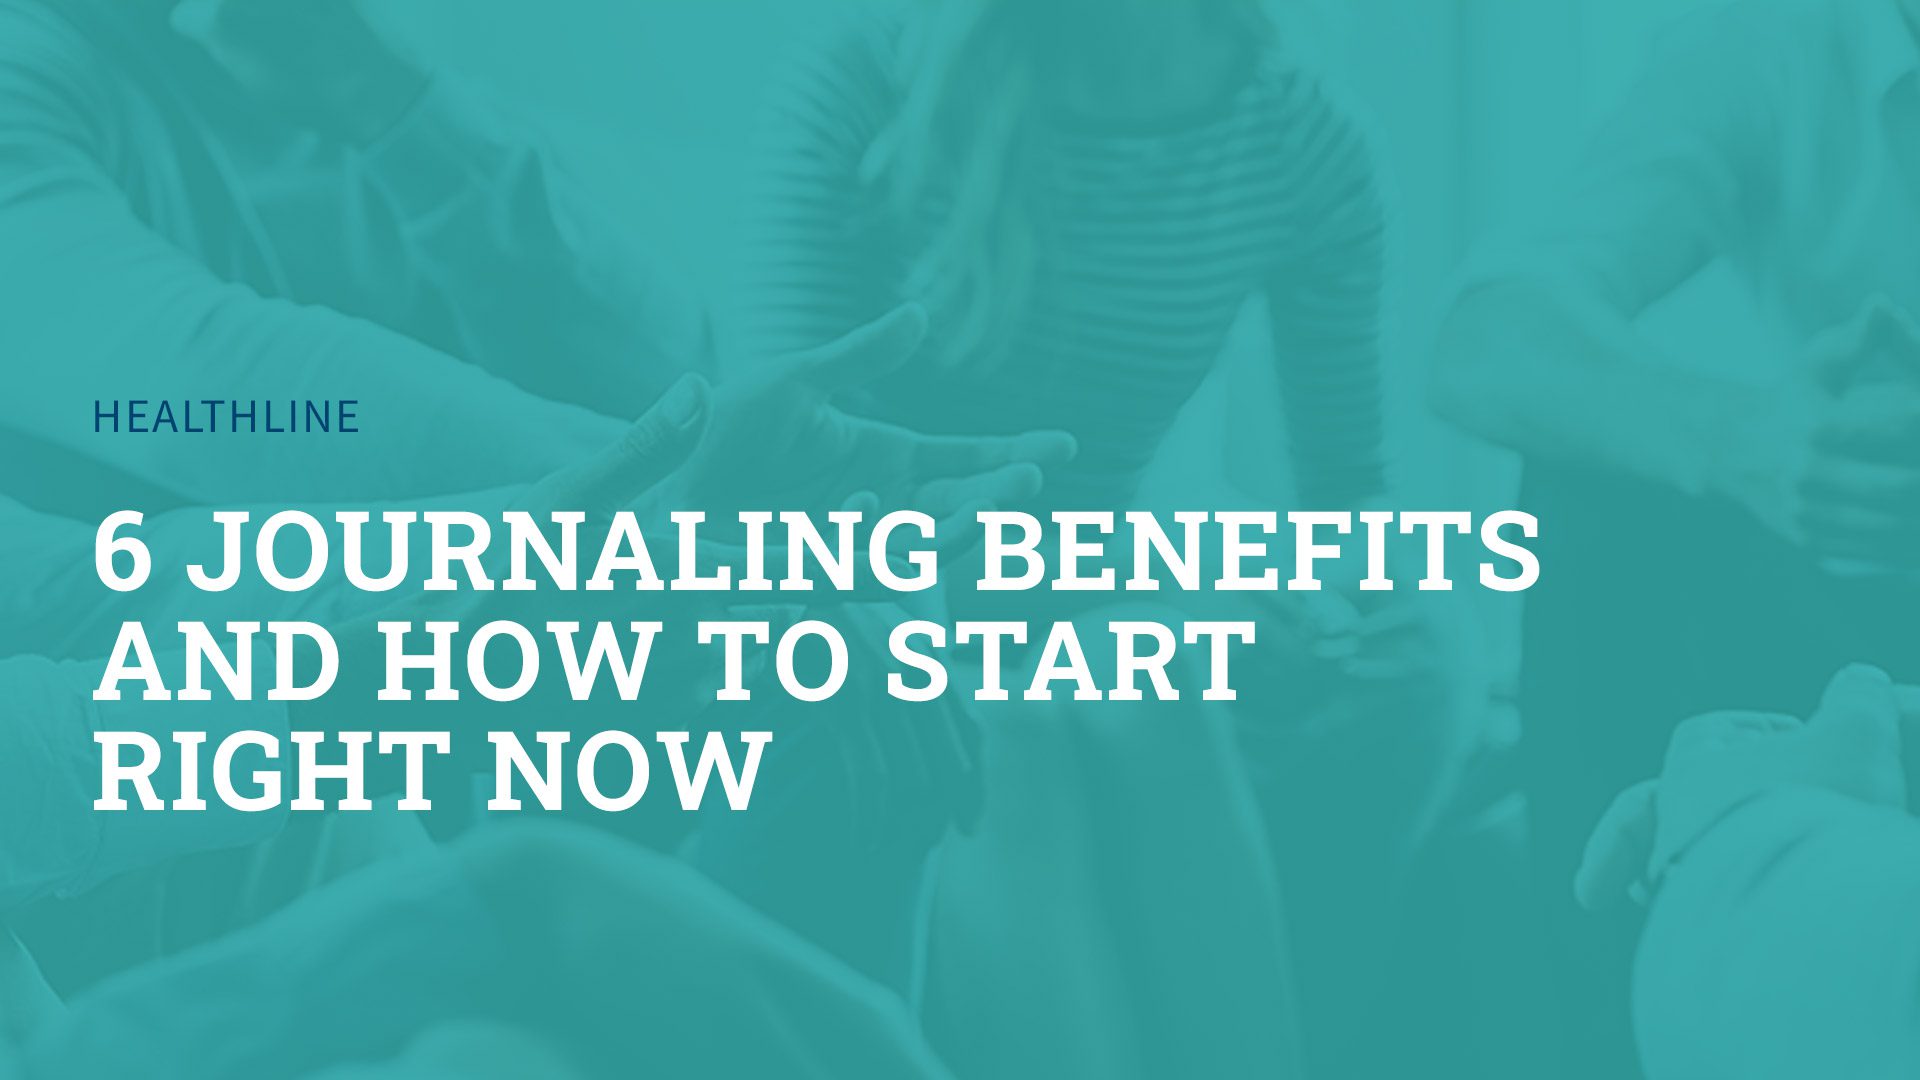 6 Journaling Benefits and How to Start Right Now